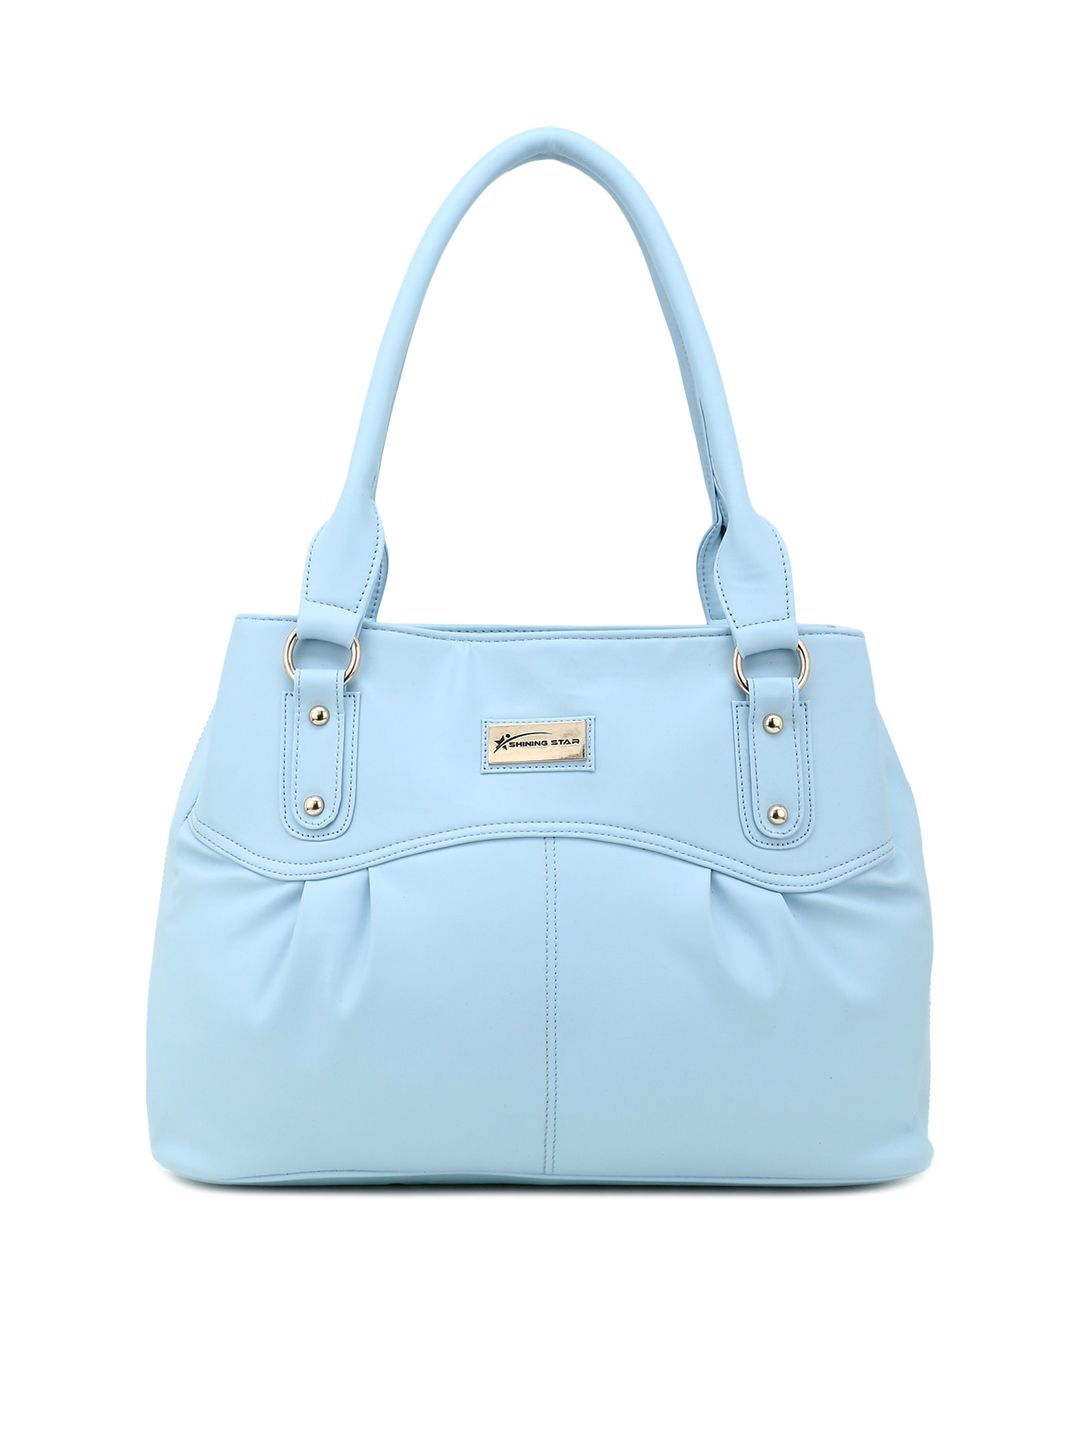 SHINING STAR Blue PU Structured Handheld Bag Price in India